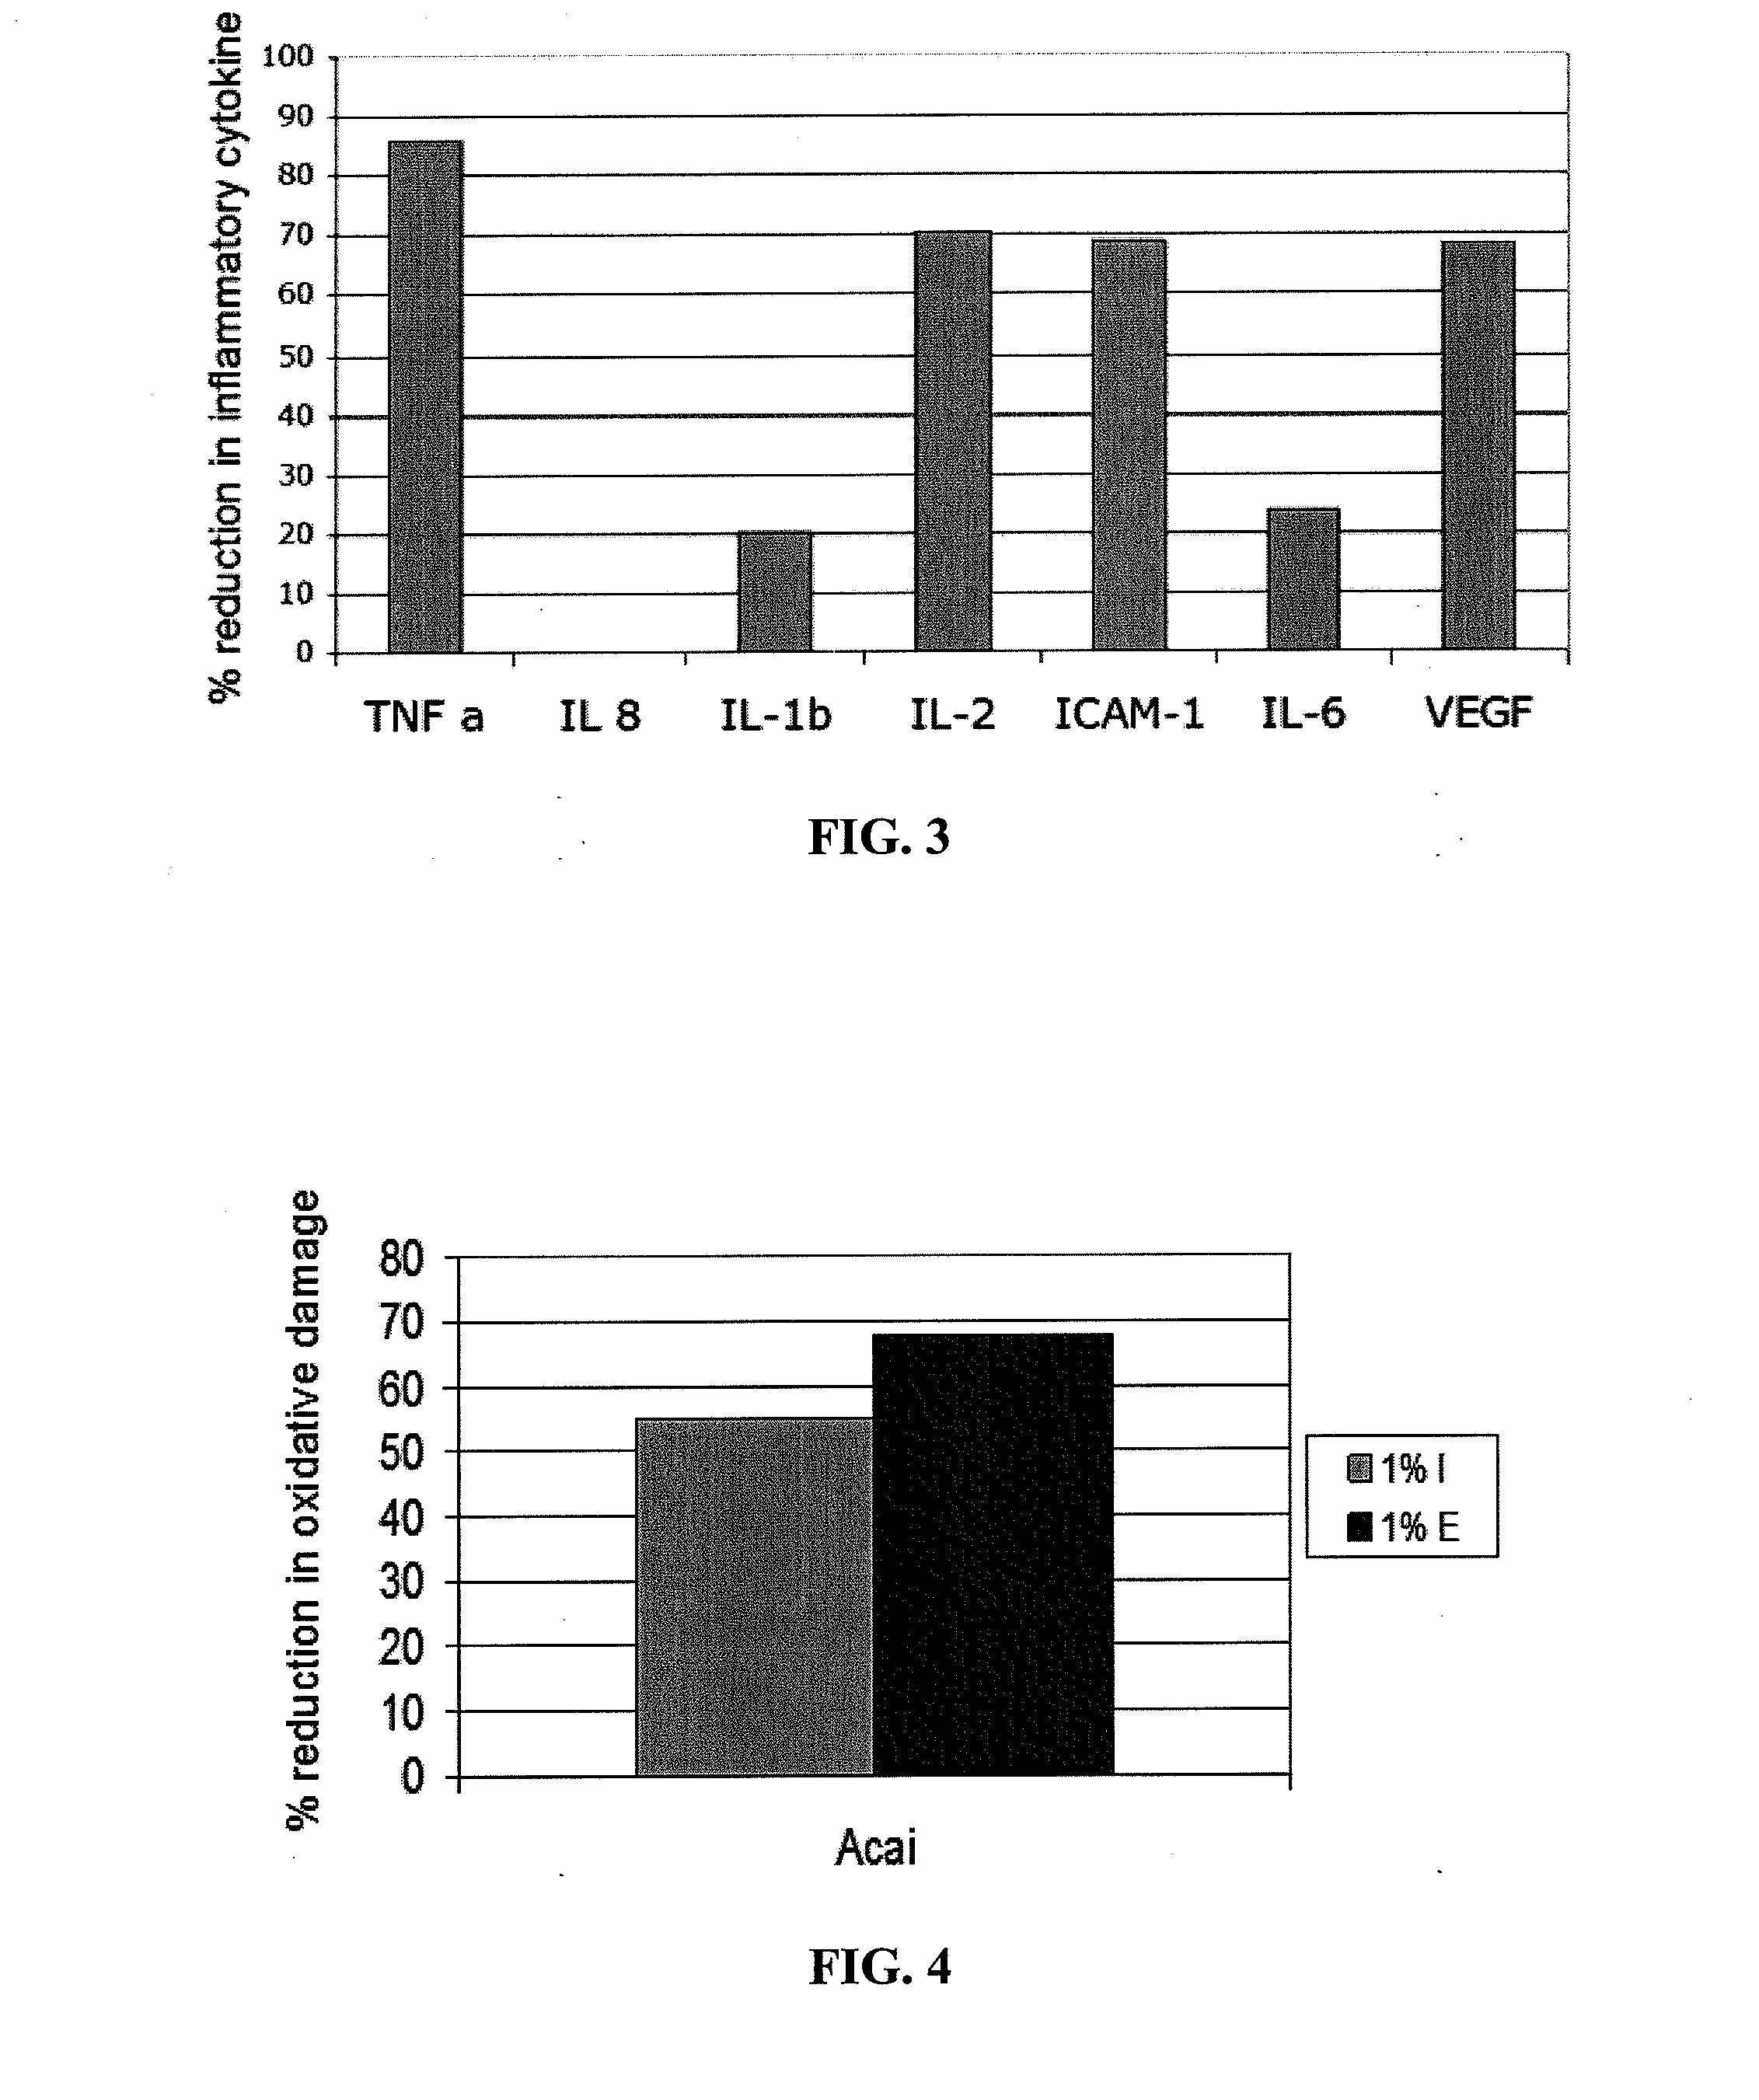 Compositions comprising kakadu plum extract or acai berry extract